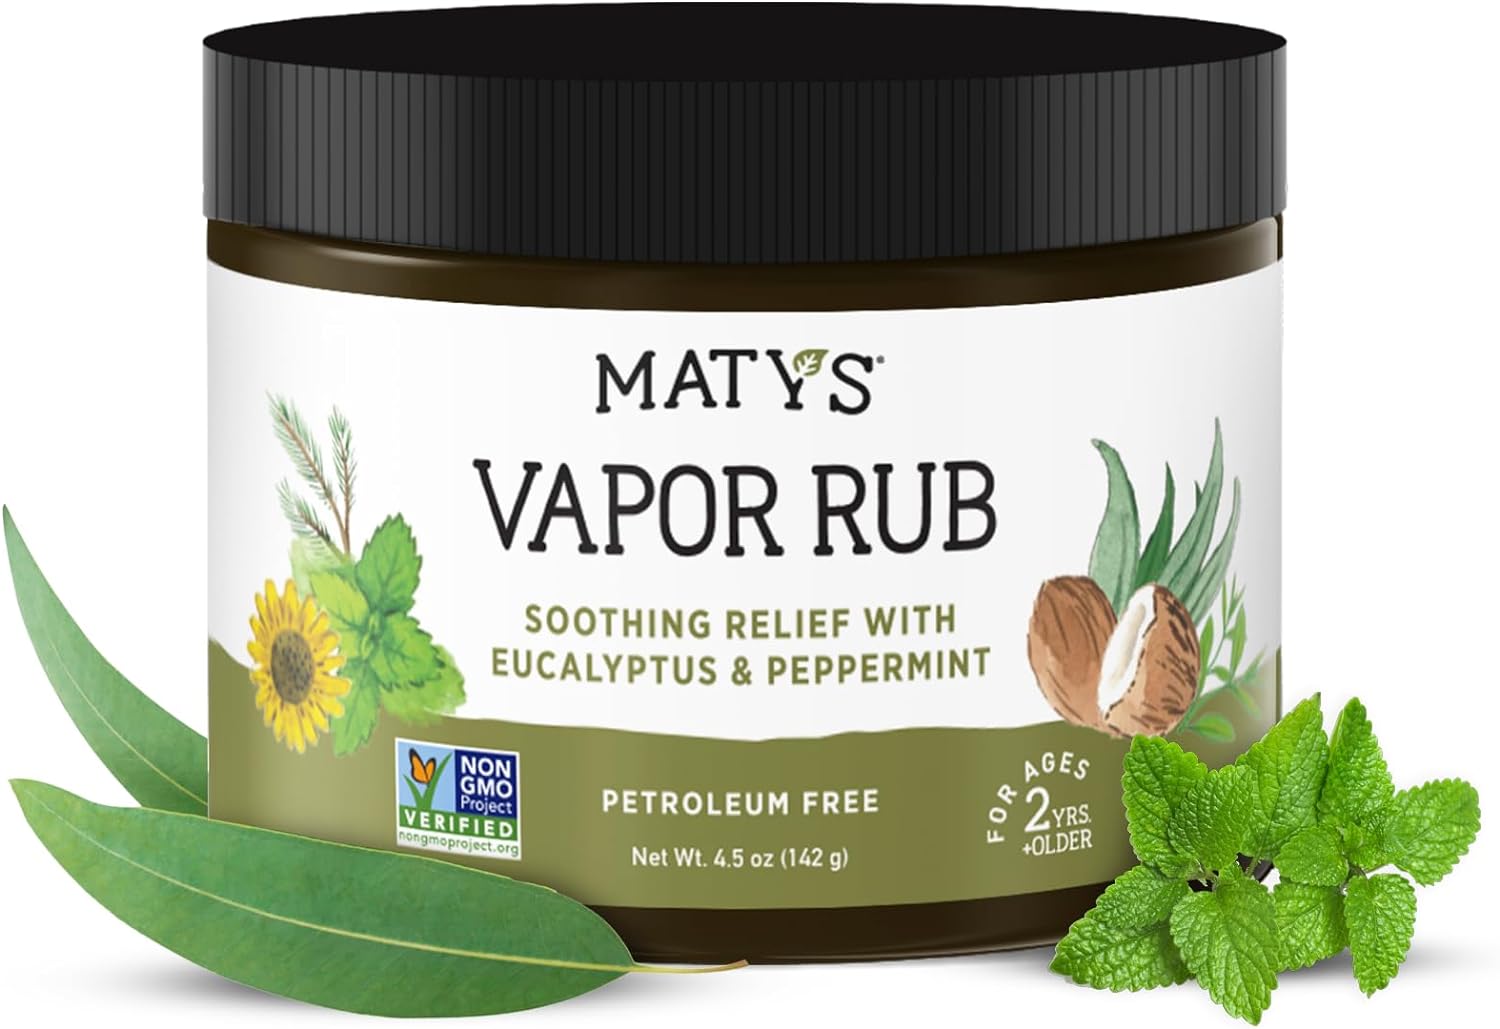 Matys Vapor Rub for Adults & Kids 2 Years Old +, Non-GMO Herbal Chest Rub to Clear Stuffy Noses, Relieve Cough & Congestion, Petroleum Free, Gluten Free with Eucalyptus & Peppermint, New 4.5 oz tub